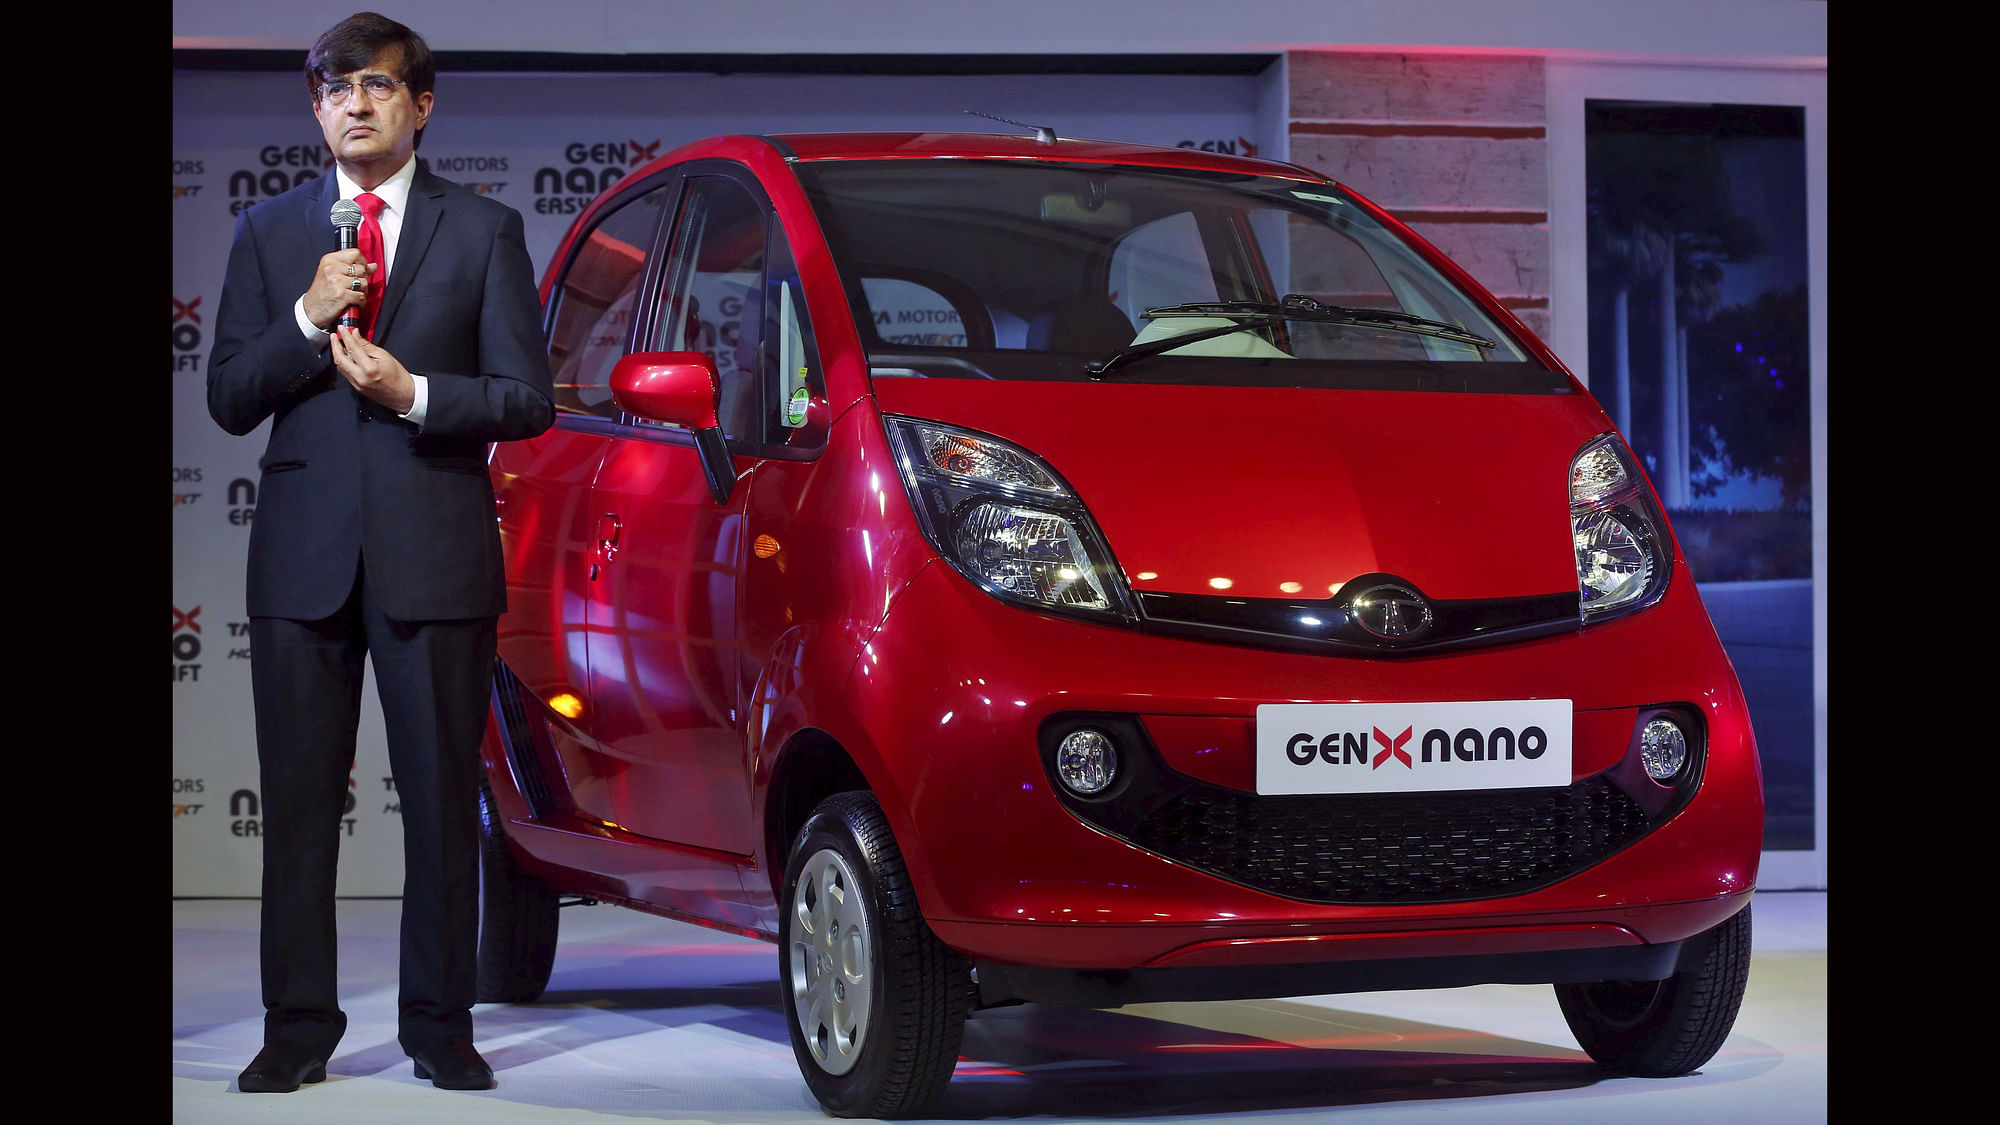 

<!--StartFragment-->Mayank Pareek, President of Tata Motors, listens to a question as he stands next to the company’s new GenX Nano&nbsp;car during its launch in Mumbai. (Photo: Reuters) <!--EndFragment-->